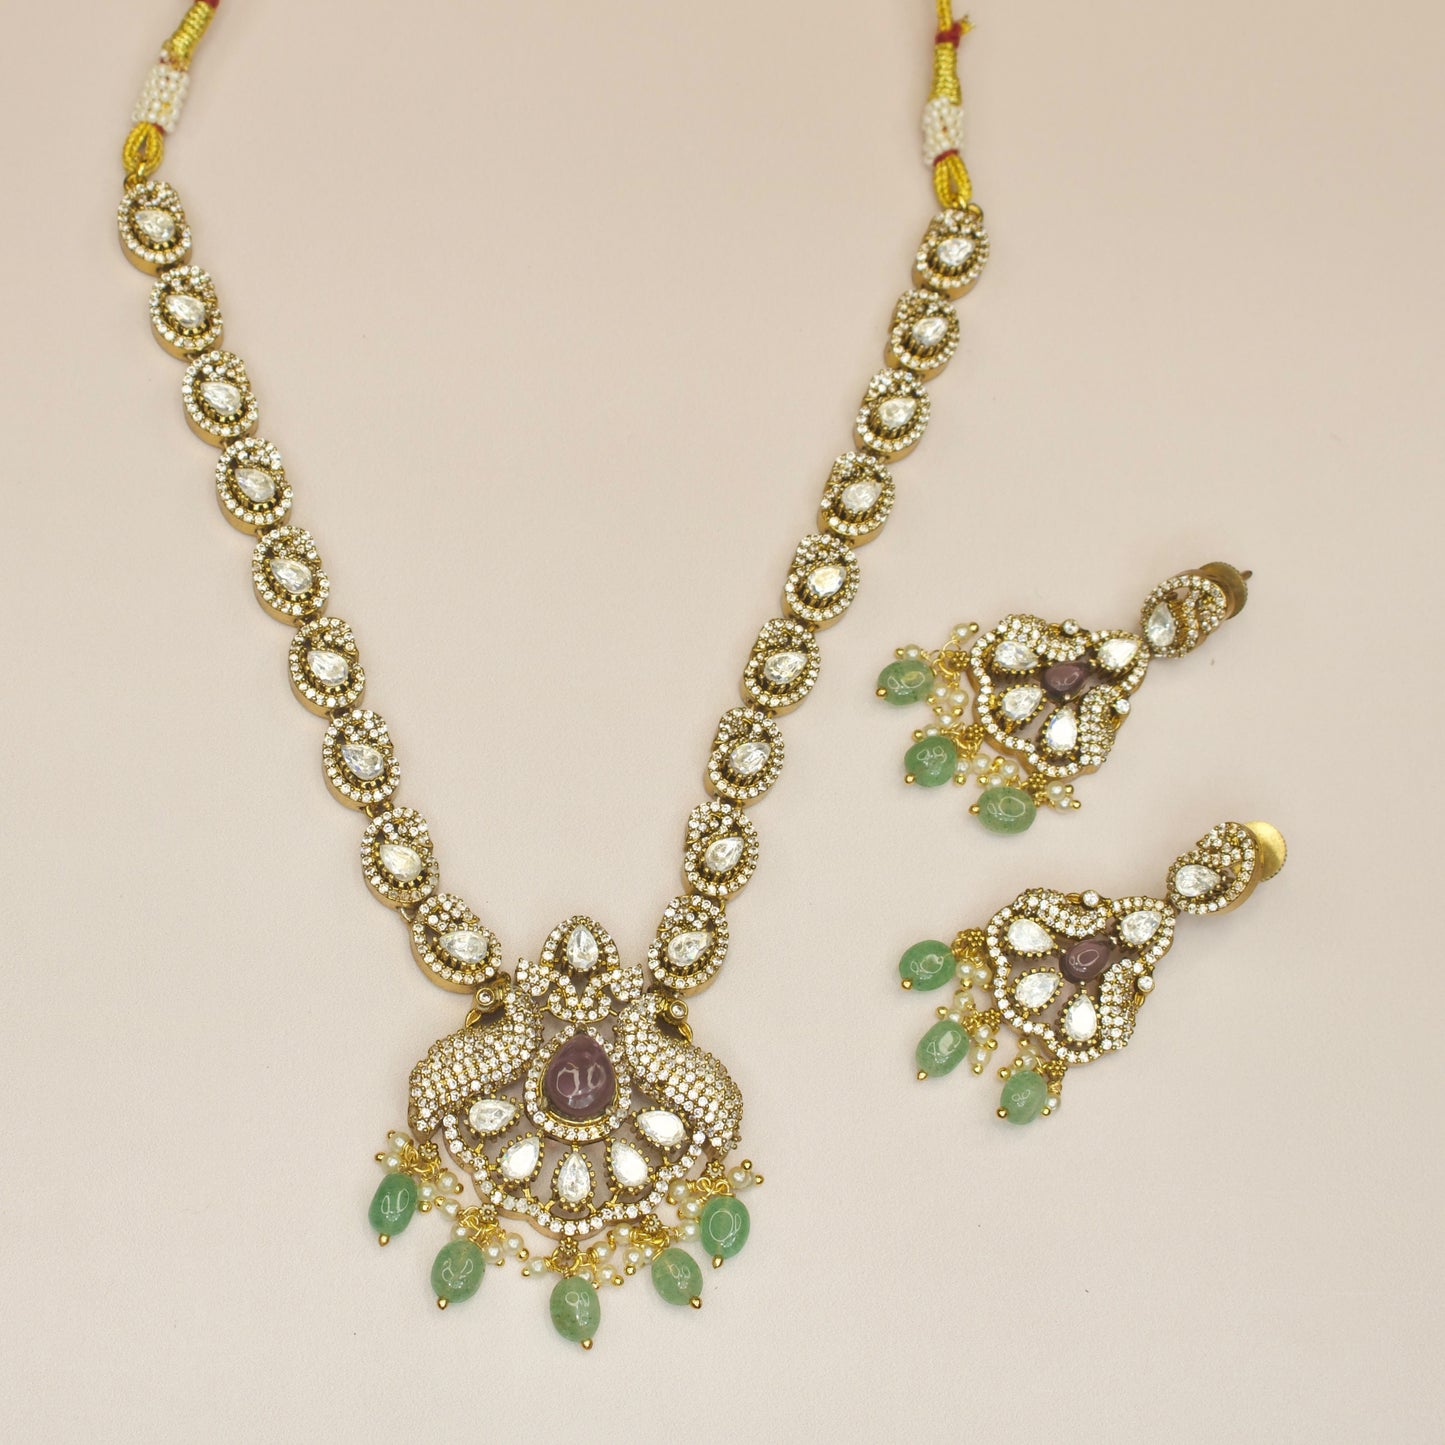 Peacock Victorian Zircon Necklace Set with earrings